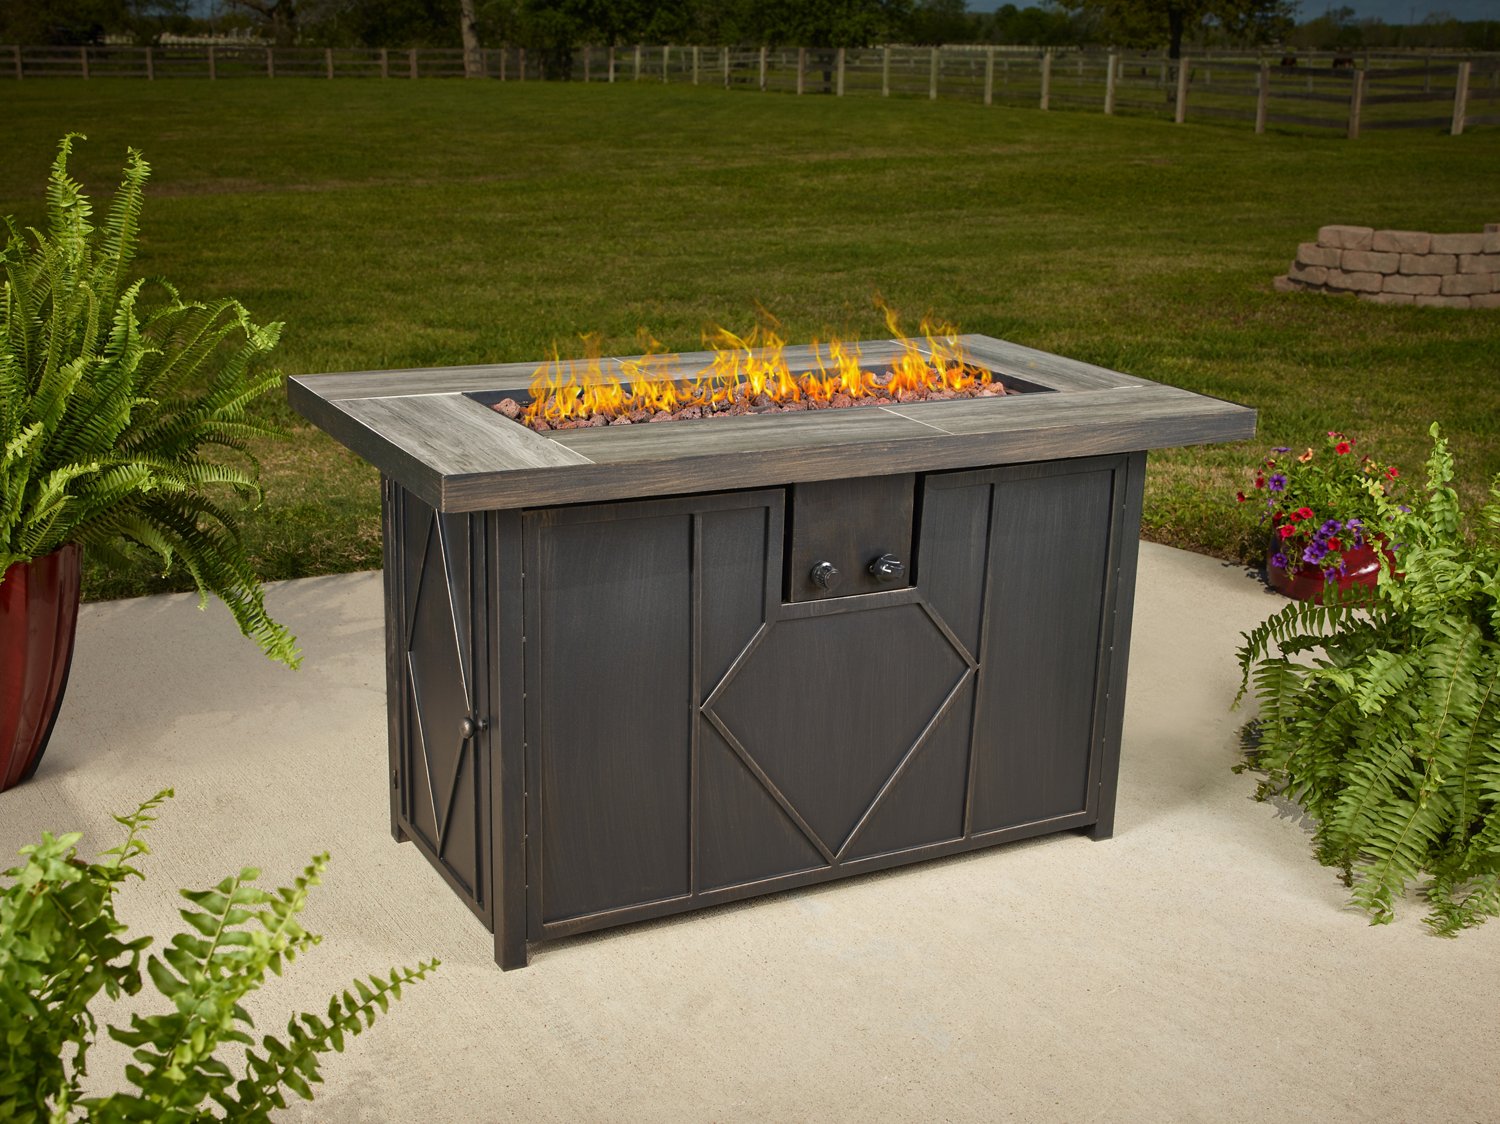 Mosaic 42 in x 24 in Kingsland Gas Fire Pit | Academy